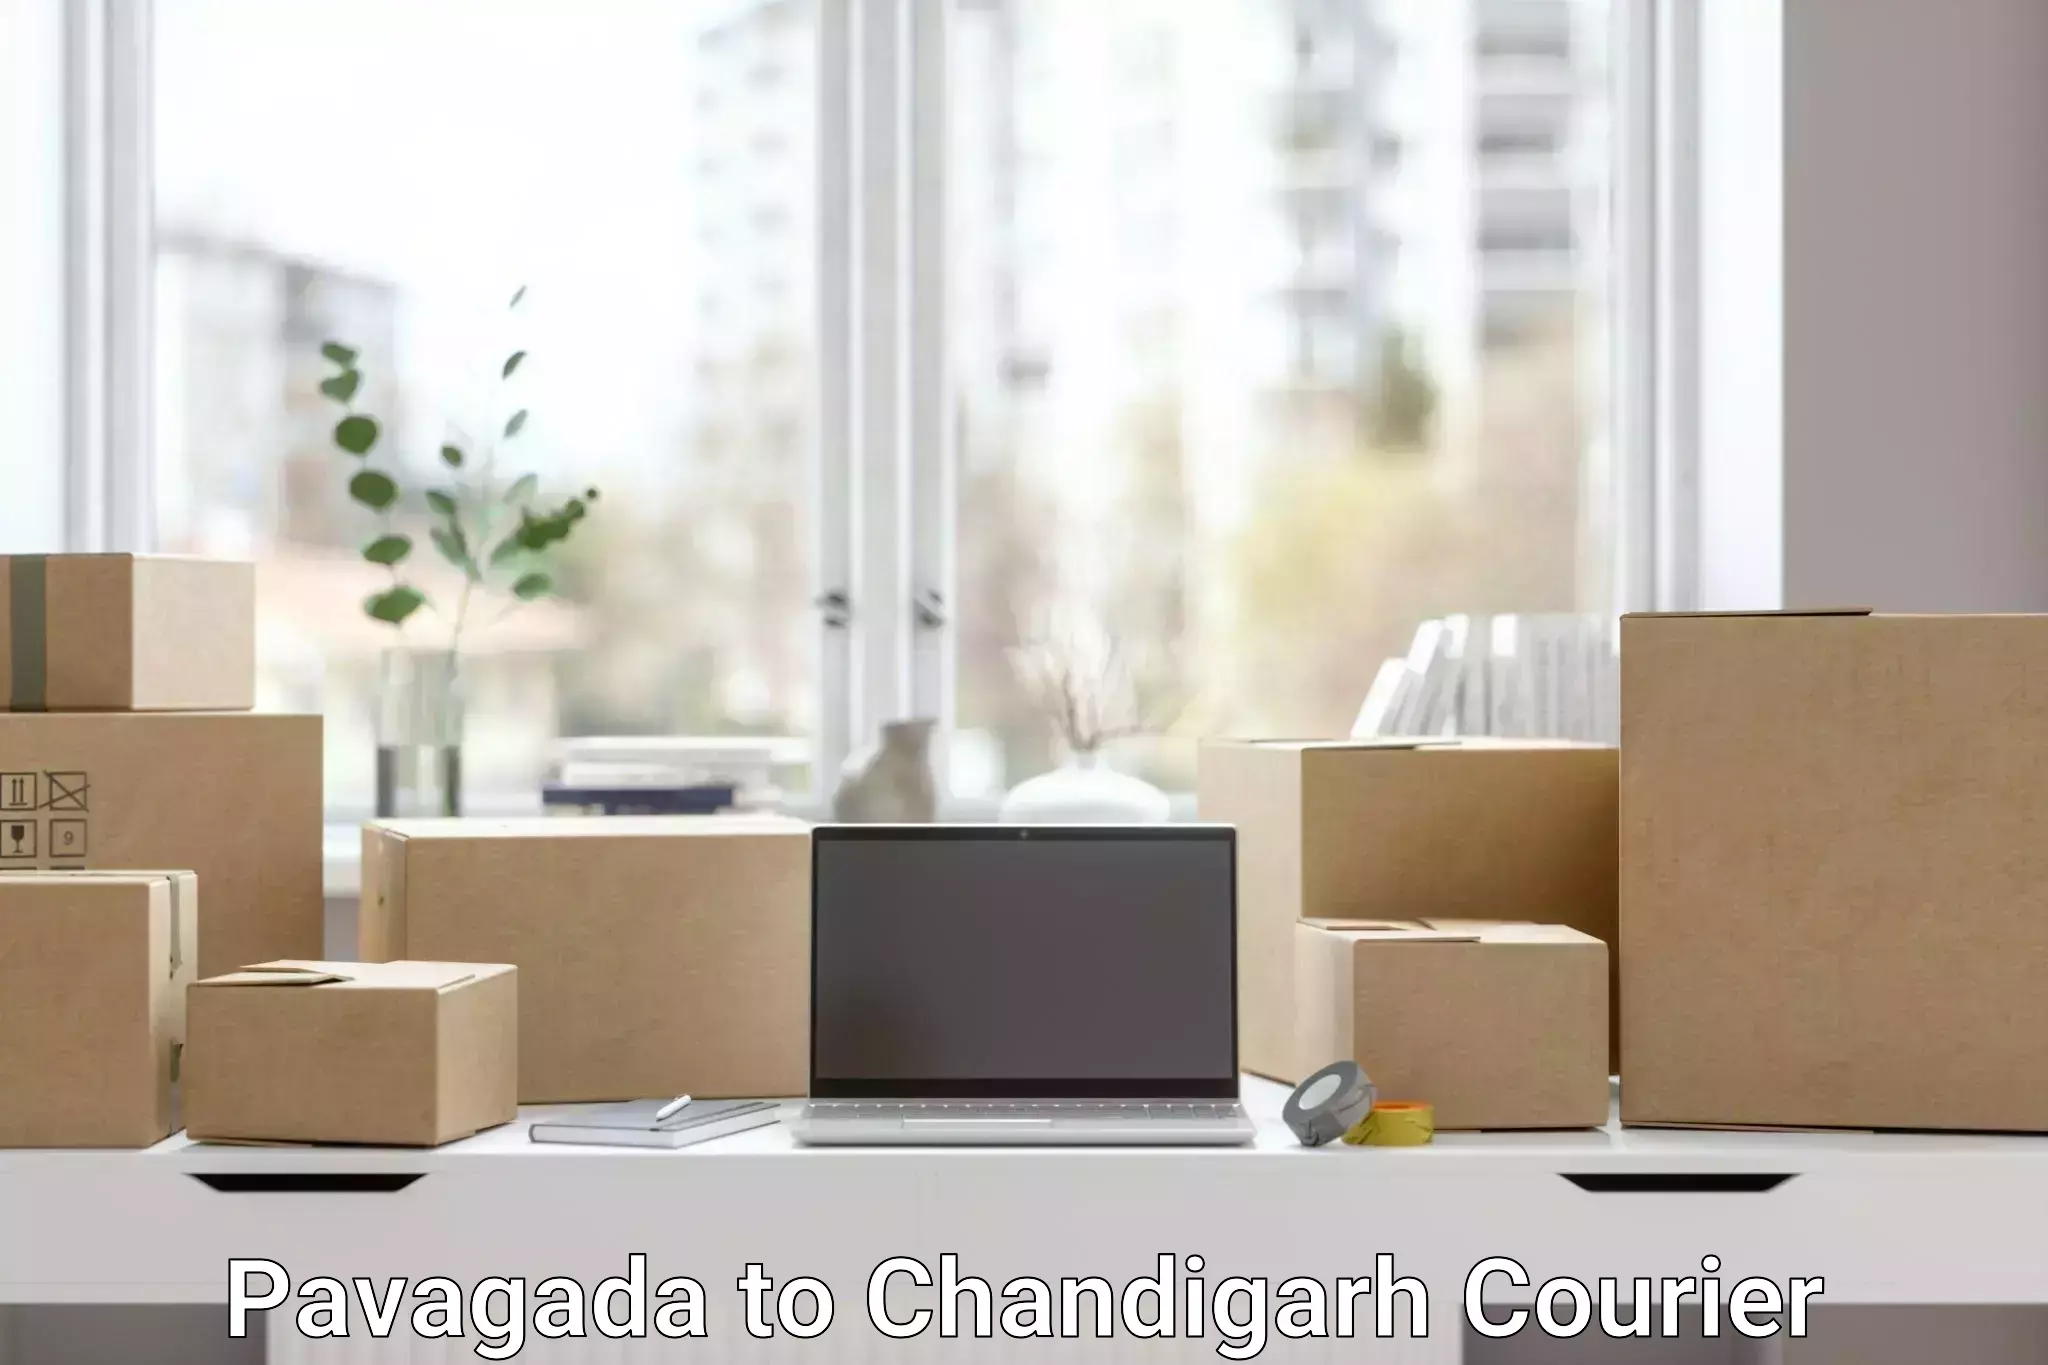 End-to-end delivery Pavagada to Chandigarh